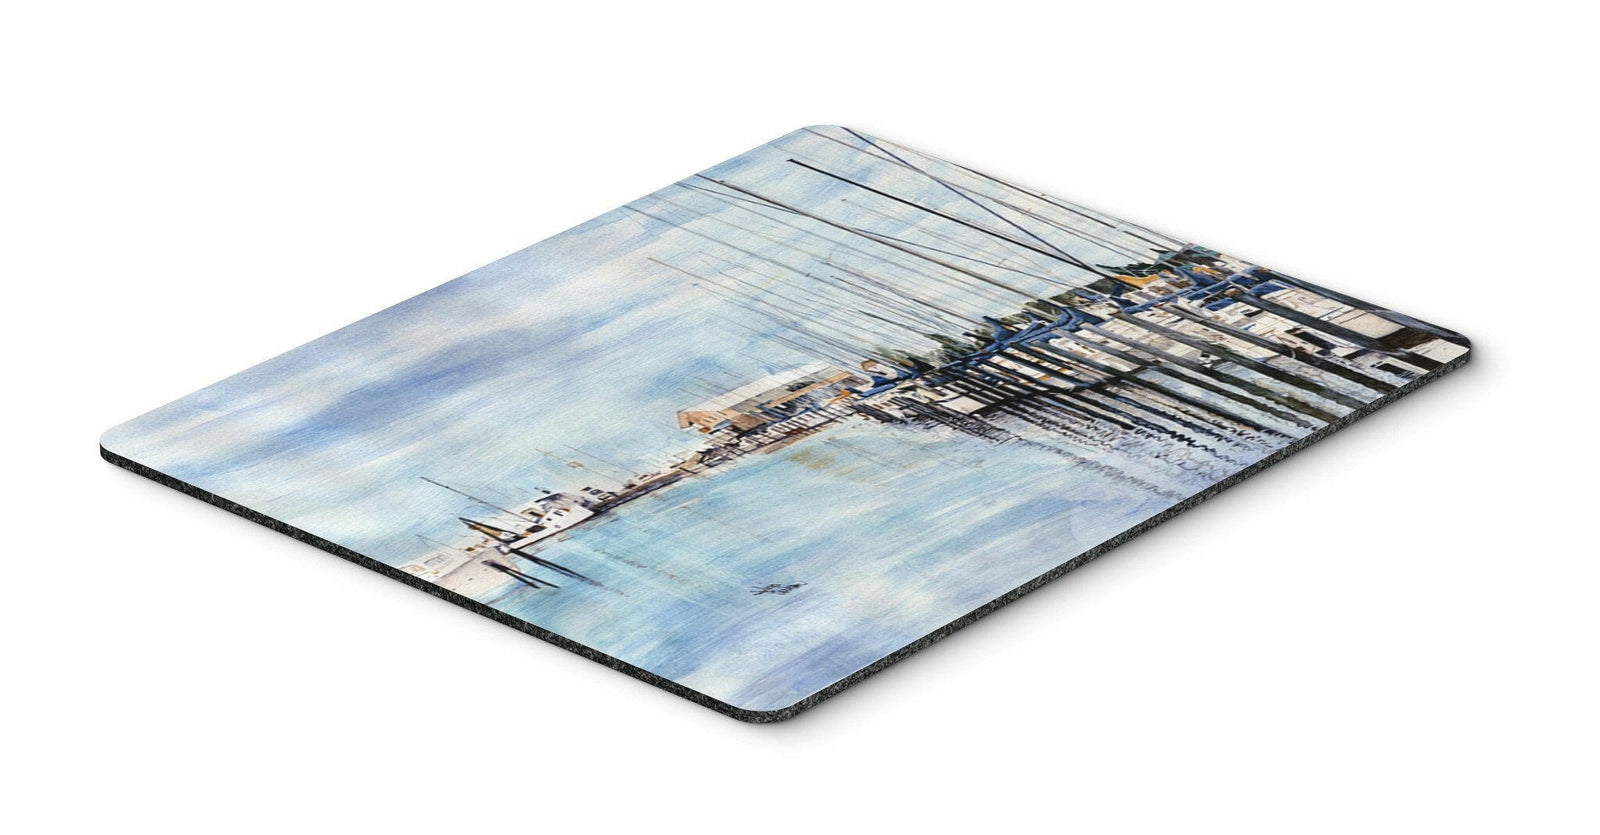 The Warf Mouse pad, hot pad, or trivet by Caroline's Treasures